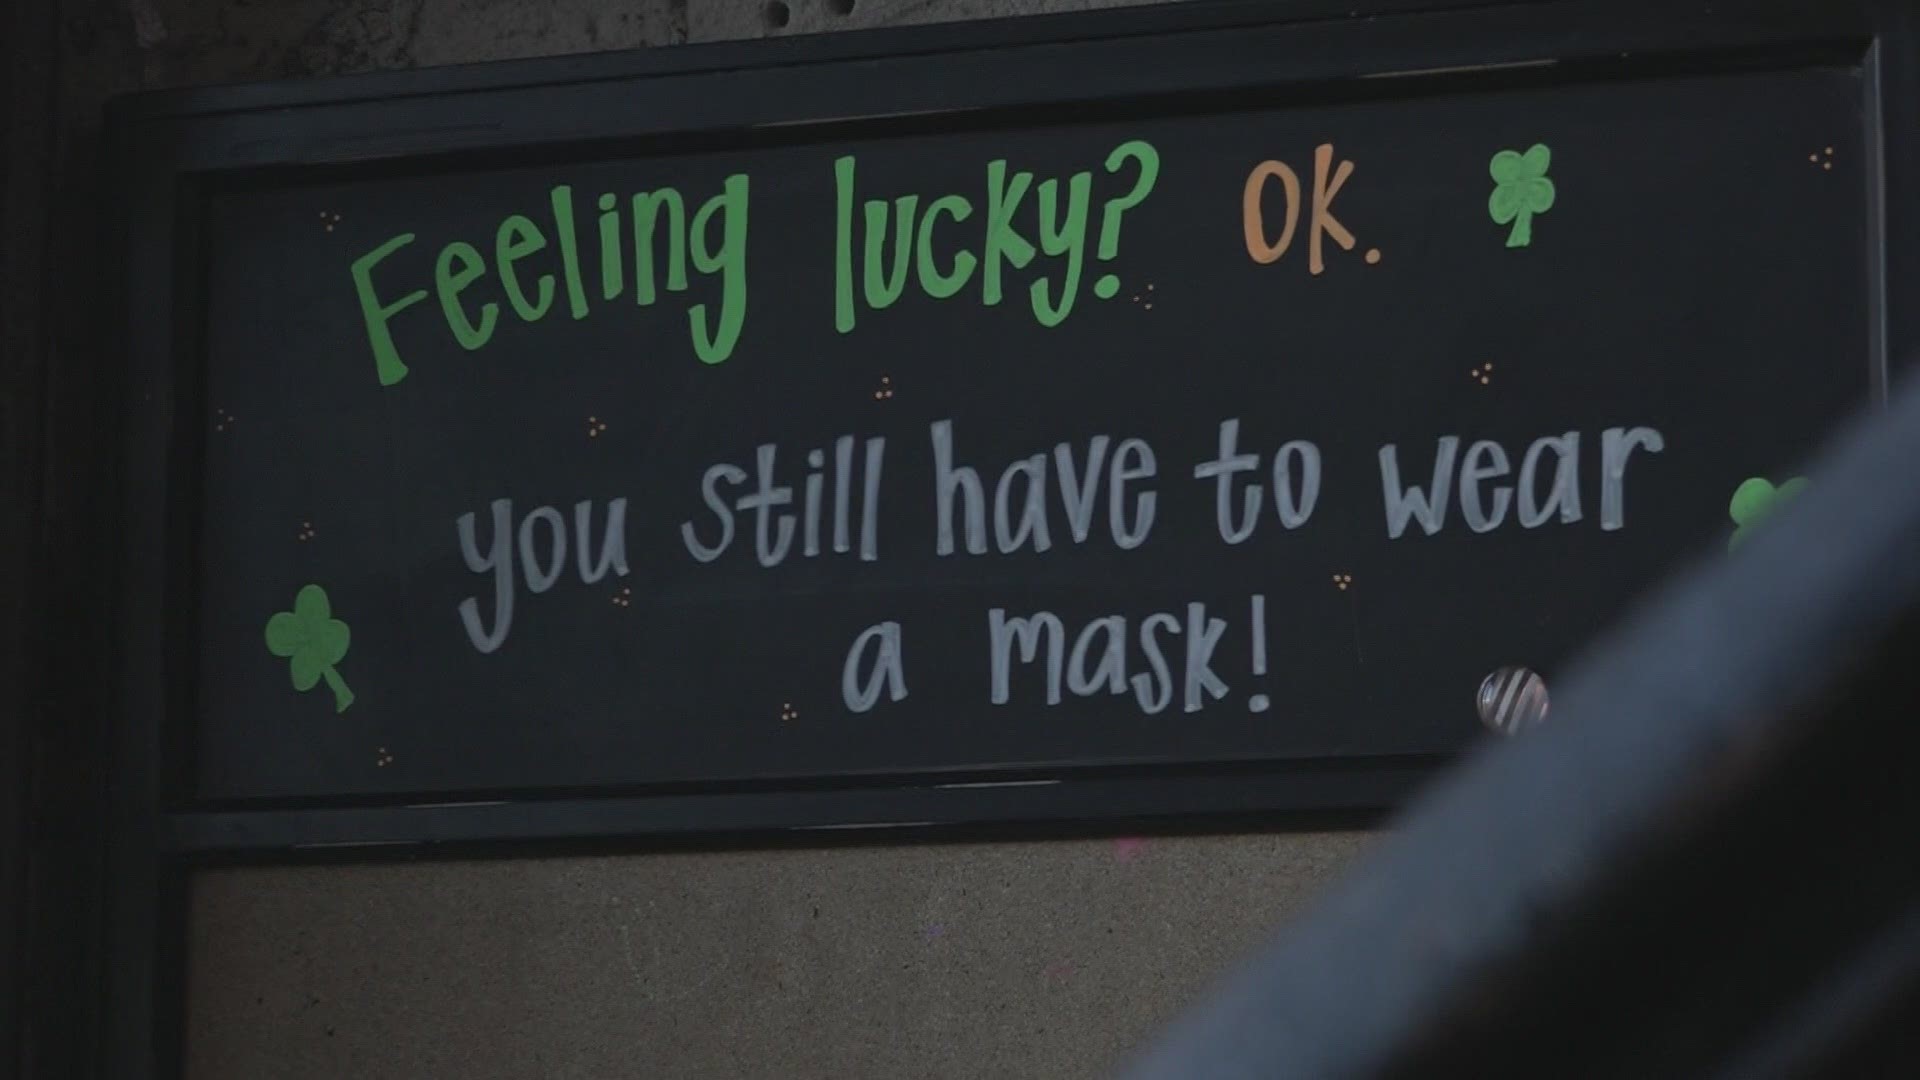 Businesses will still require masks and social distancing this weekend.